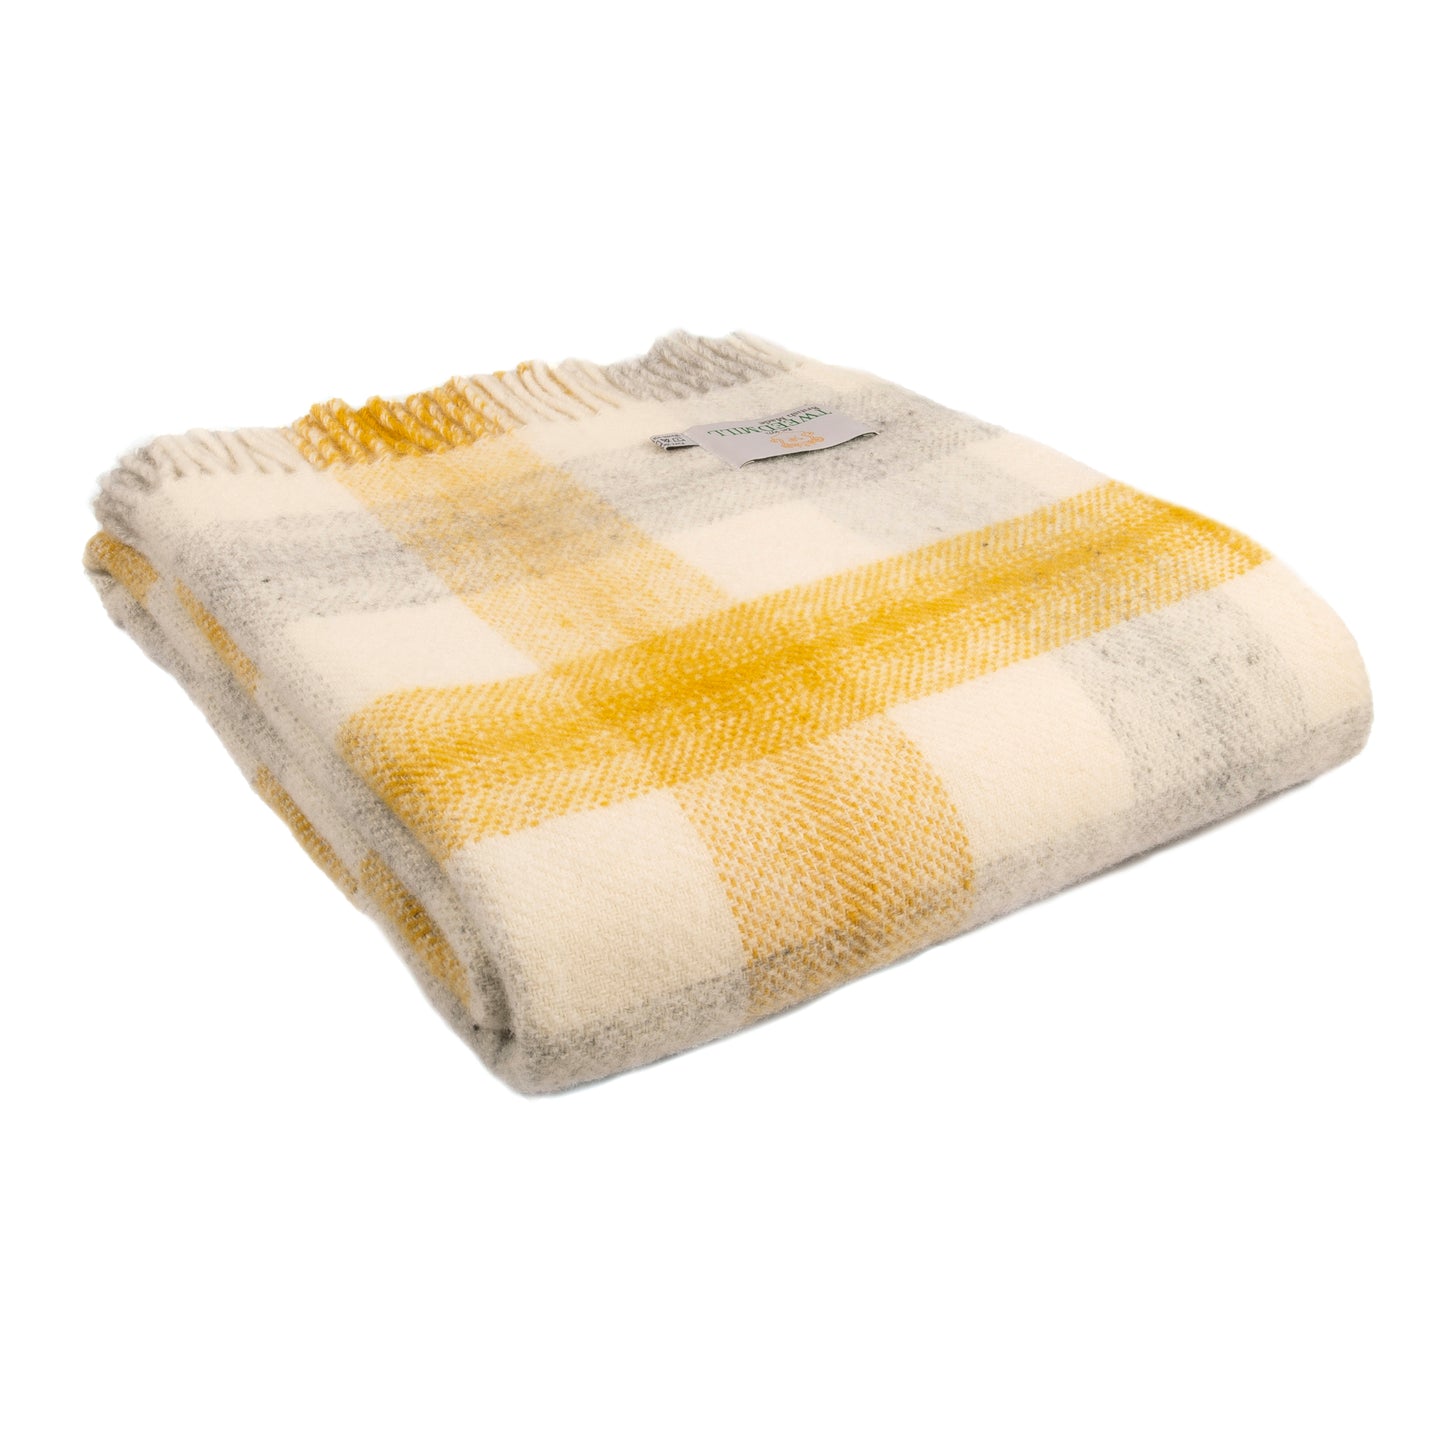 Tweedmill Meadow Check Pure New Wool Throw, Yellow